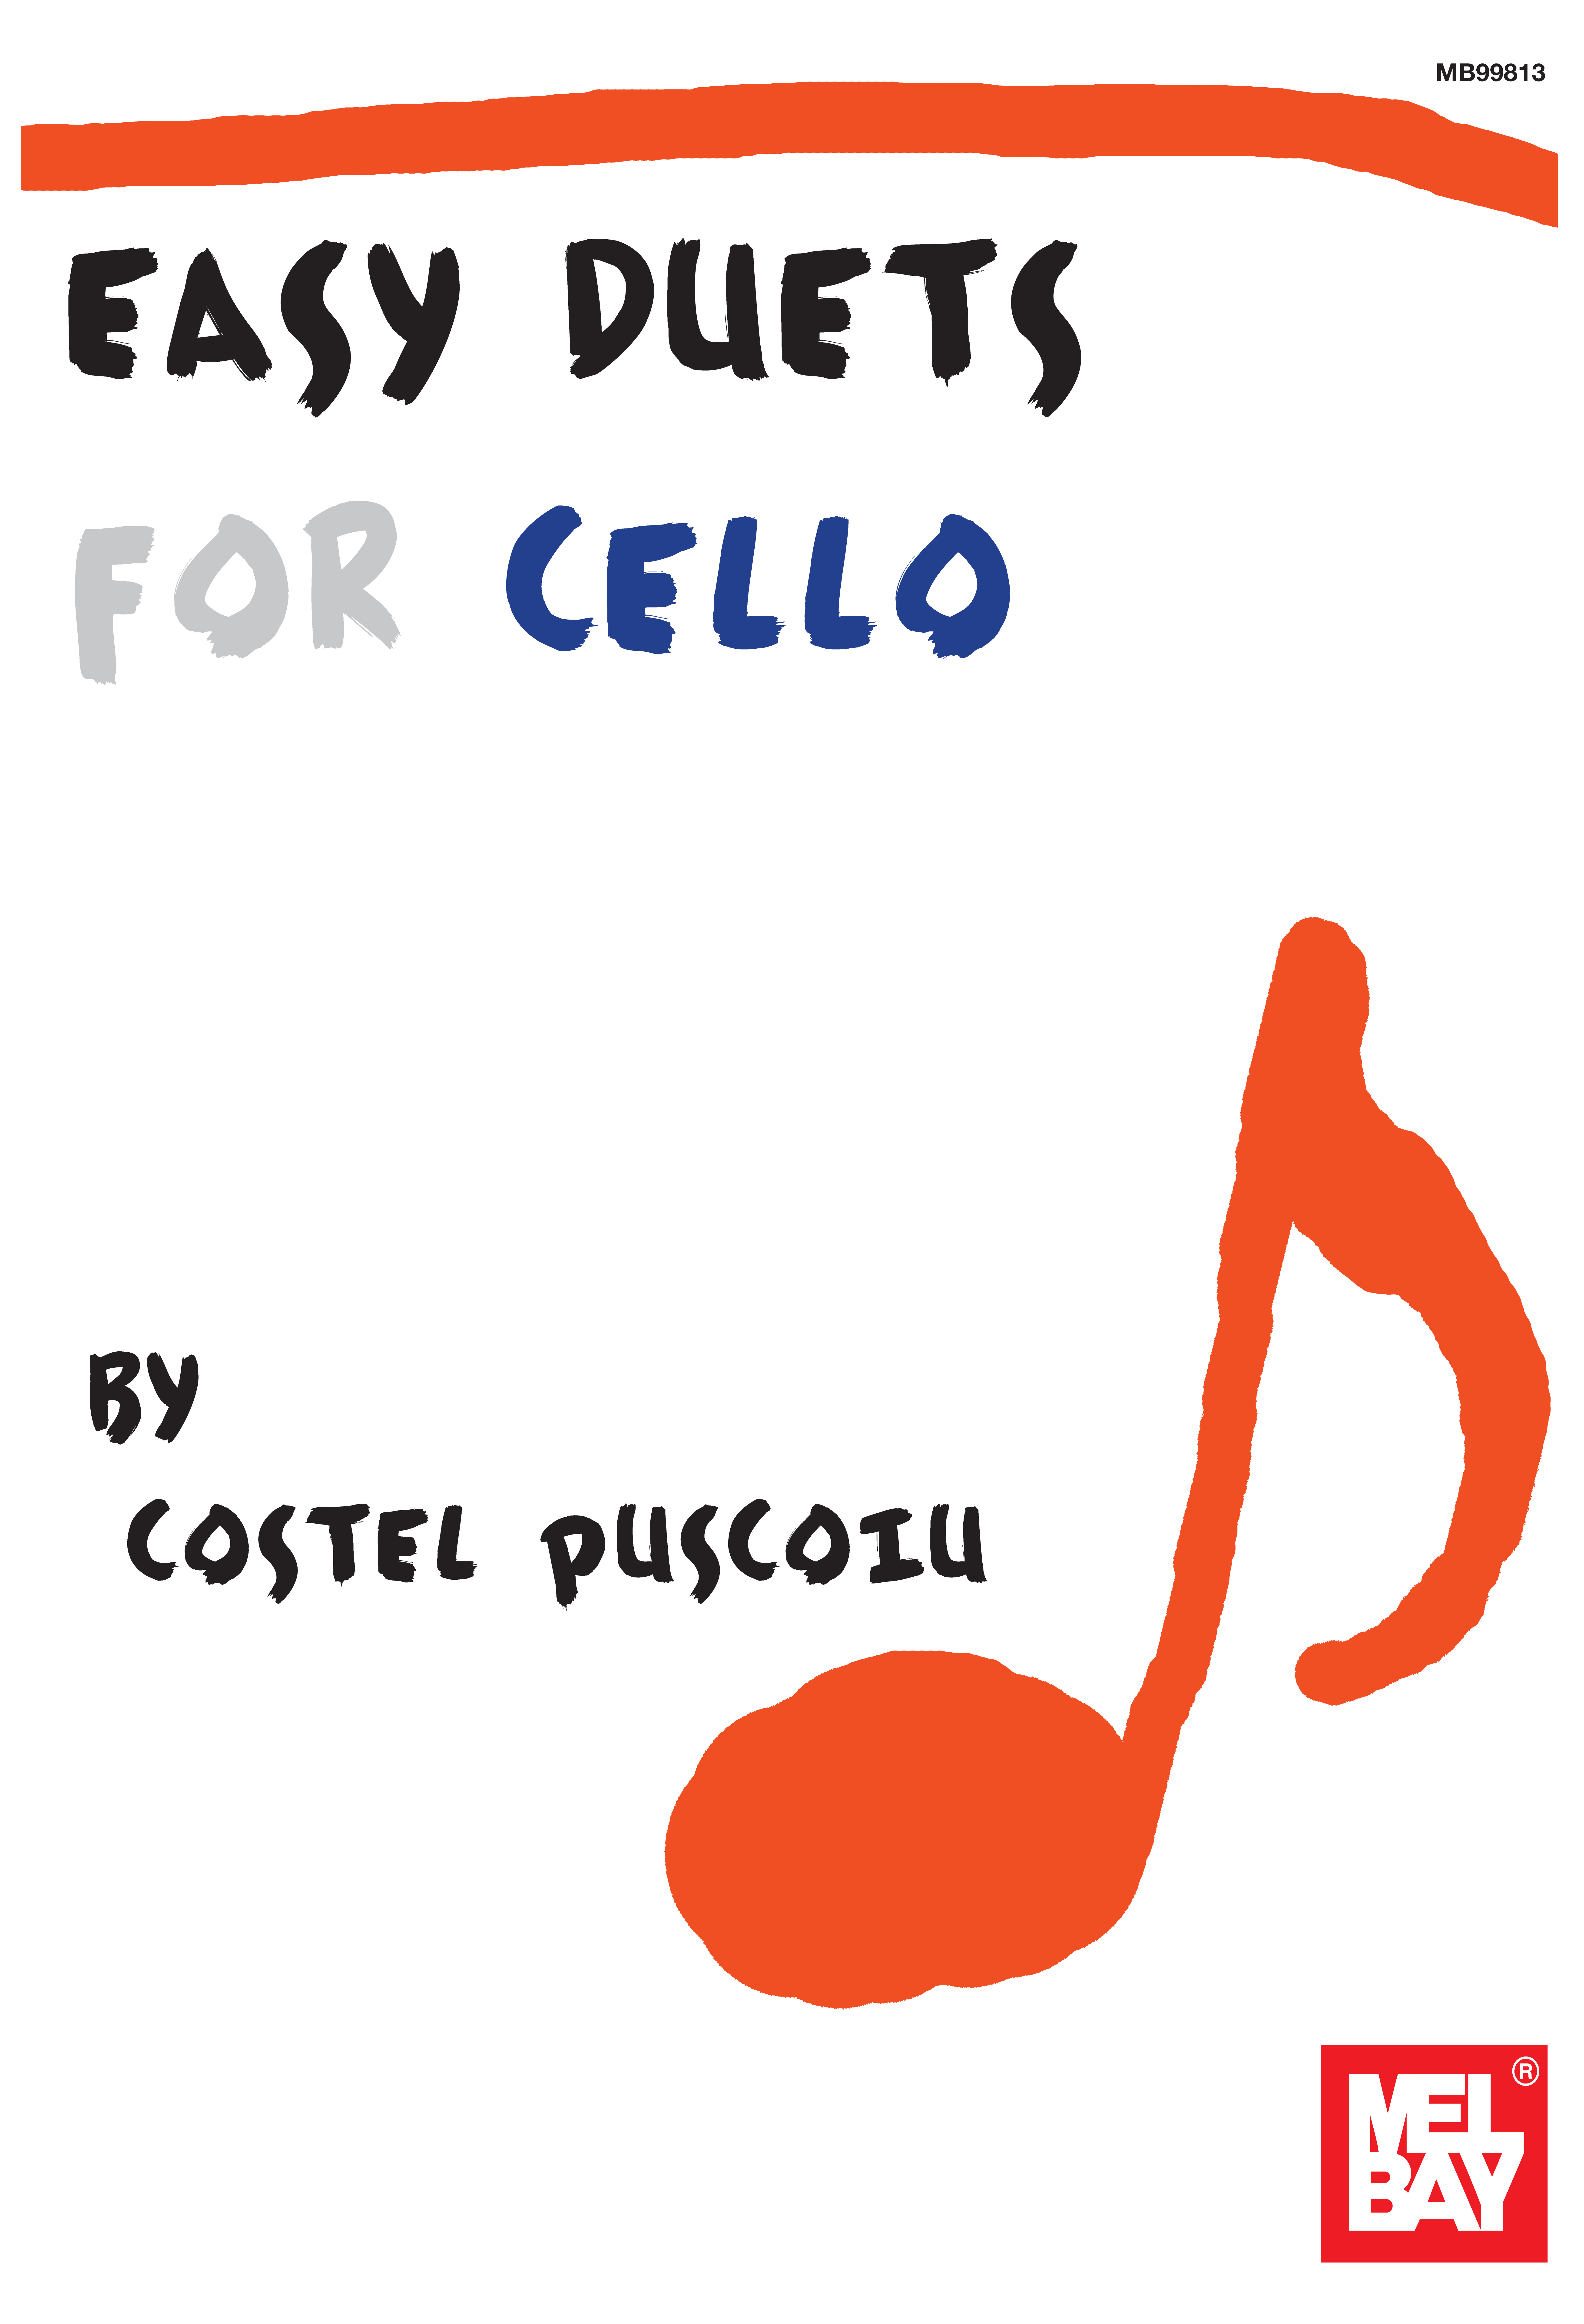 Easy Duets for Cello